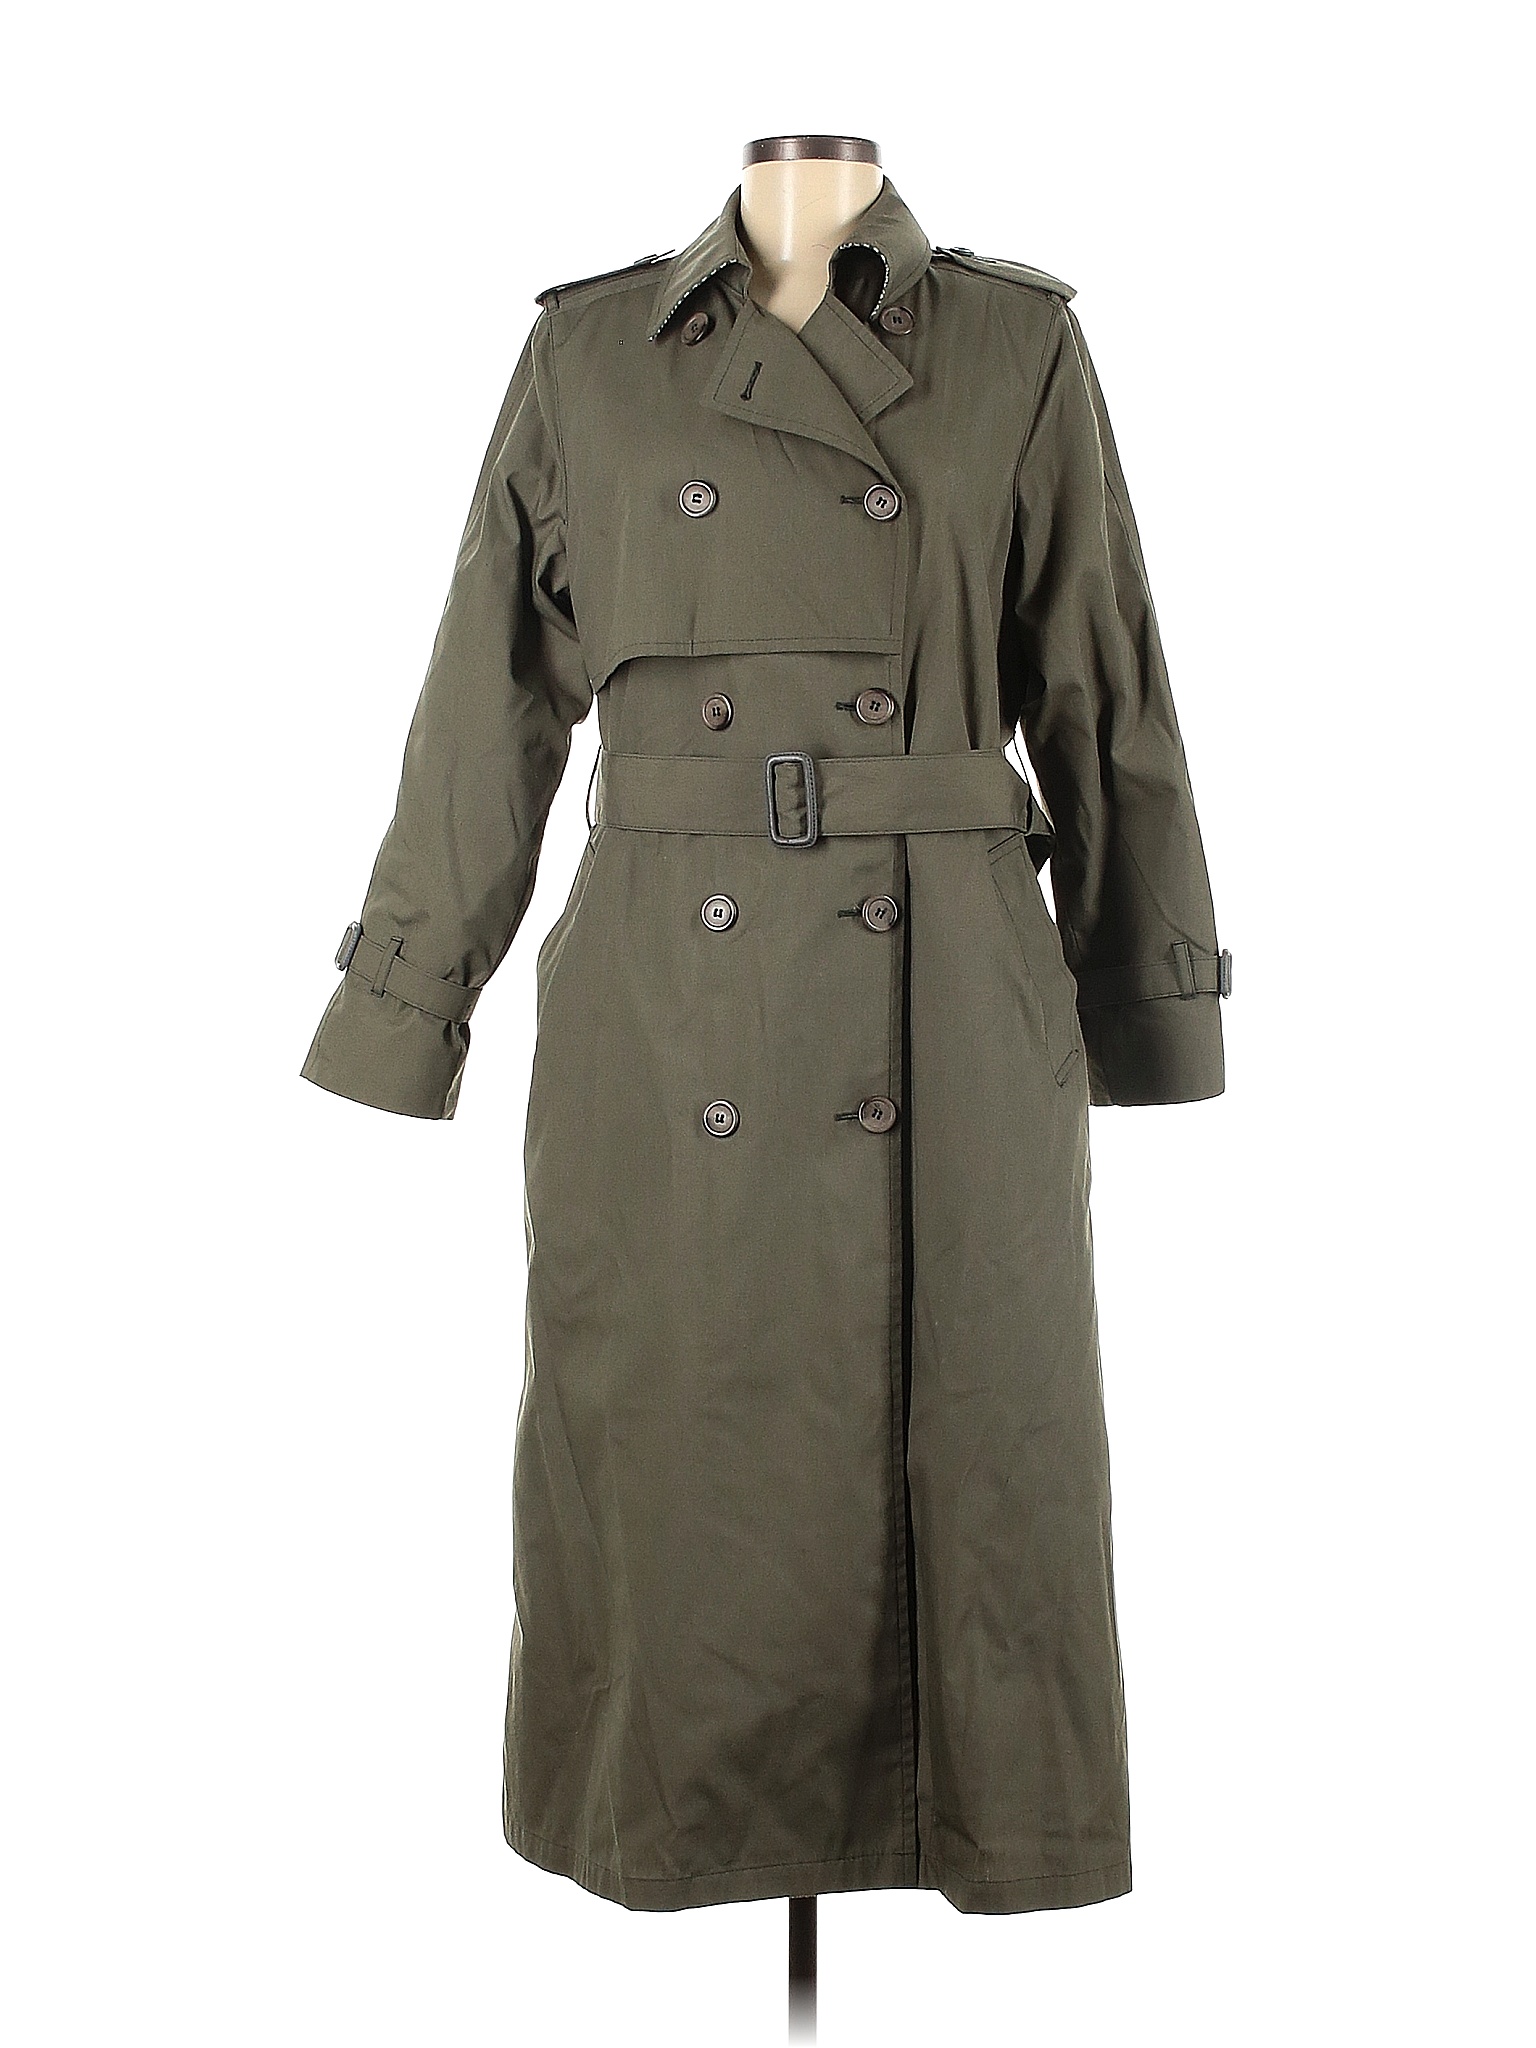 London Fog Solid Colored Green Trenchcoat Size 8 - 69% off | thredUP